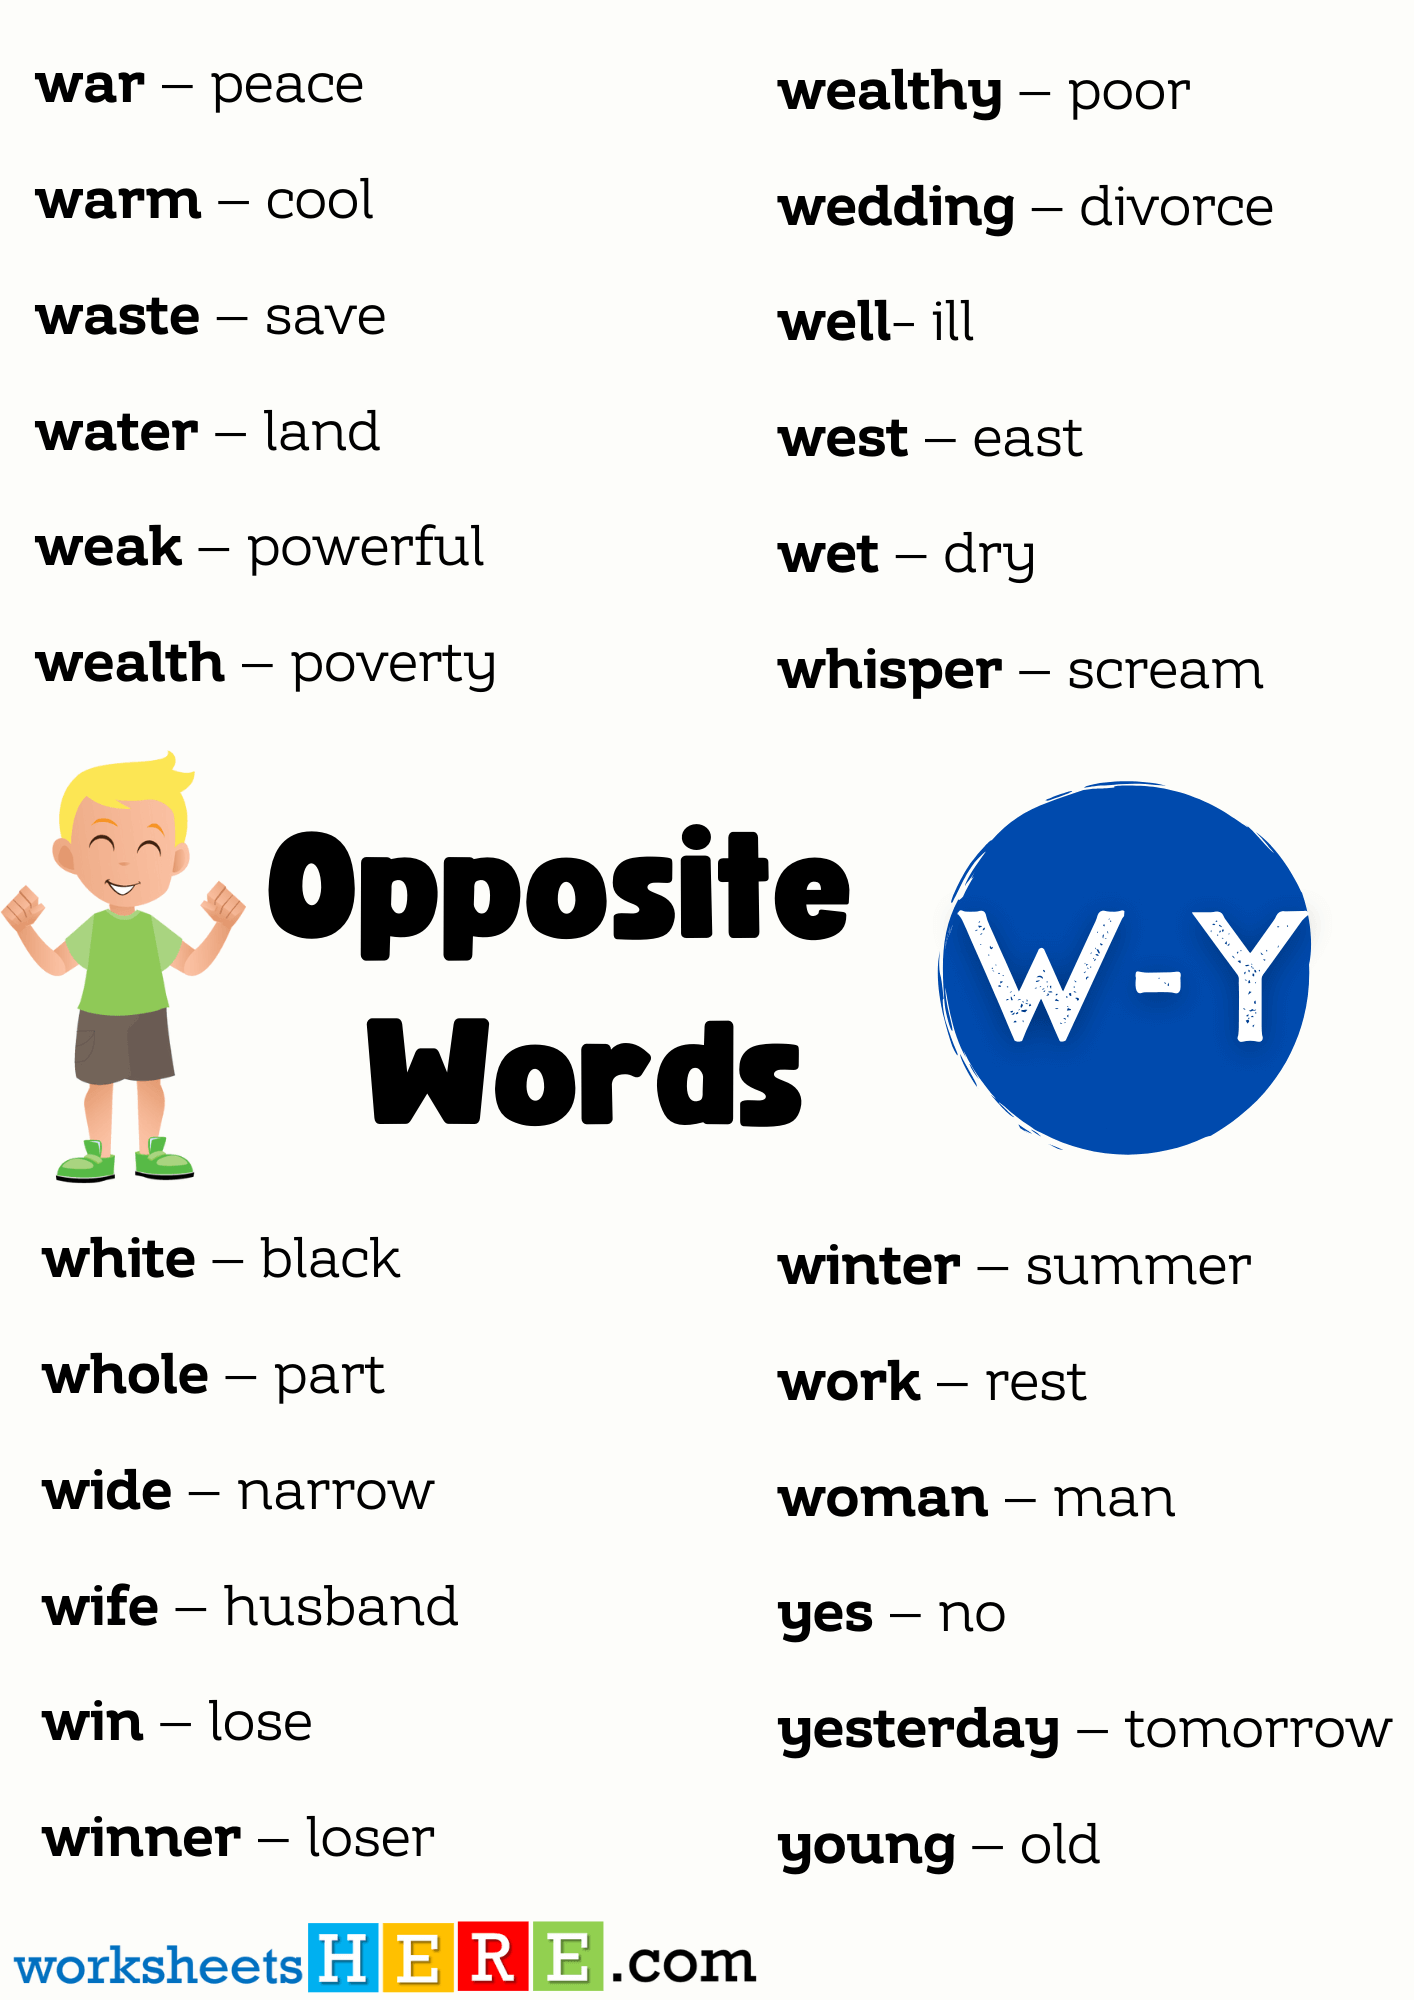 Opposite Words List Start with W, Y PDF Worksheet For Students